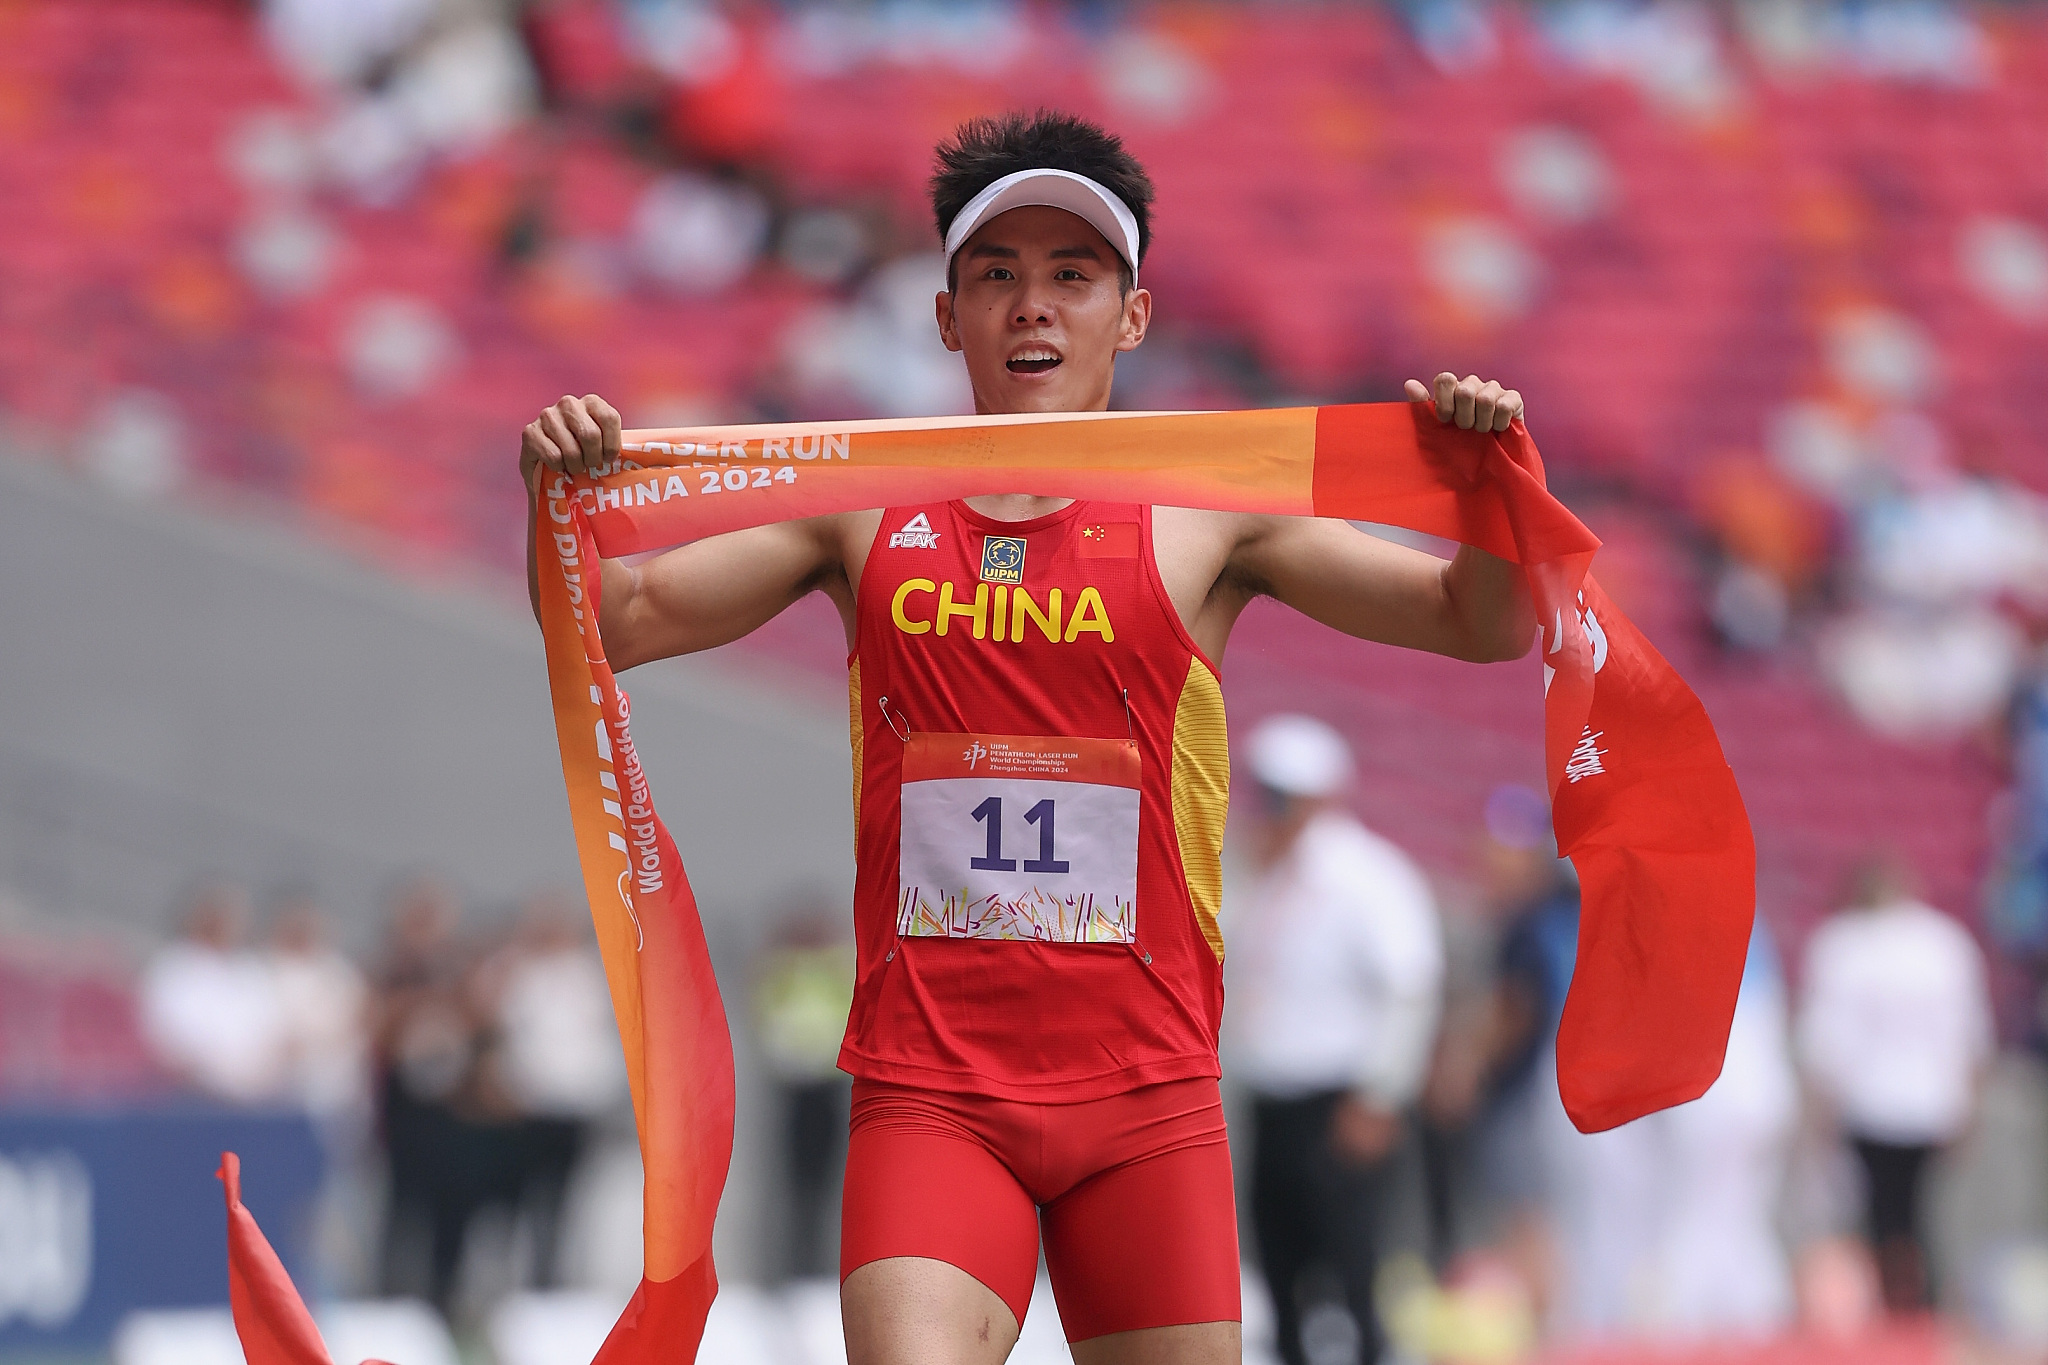 Luo Shuai of China competes in the men's laser run individual final at the World Modern Pentathlon Championships in Zhengzhou, central China's Henan Province, June 8, 2024. /CFP